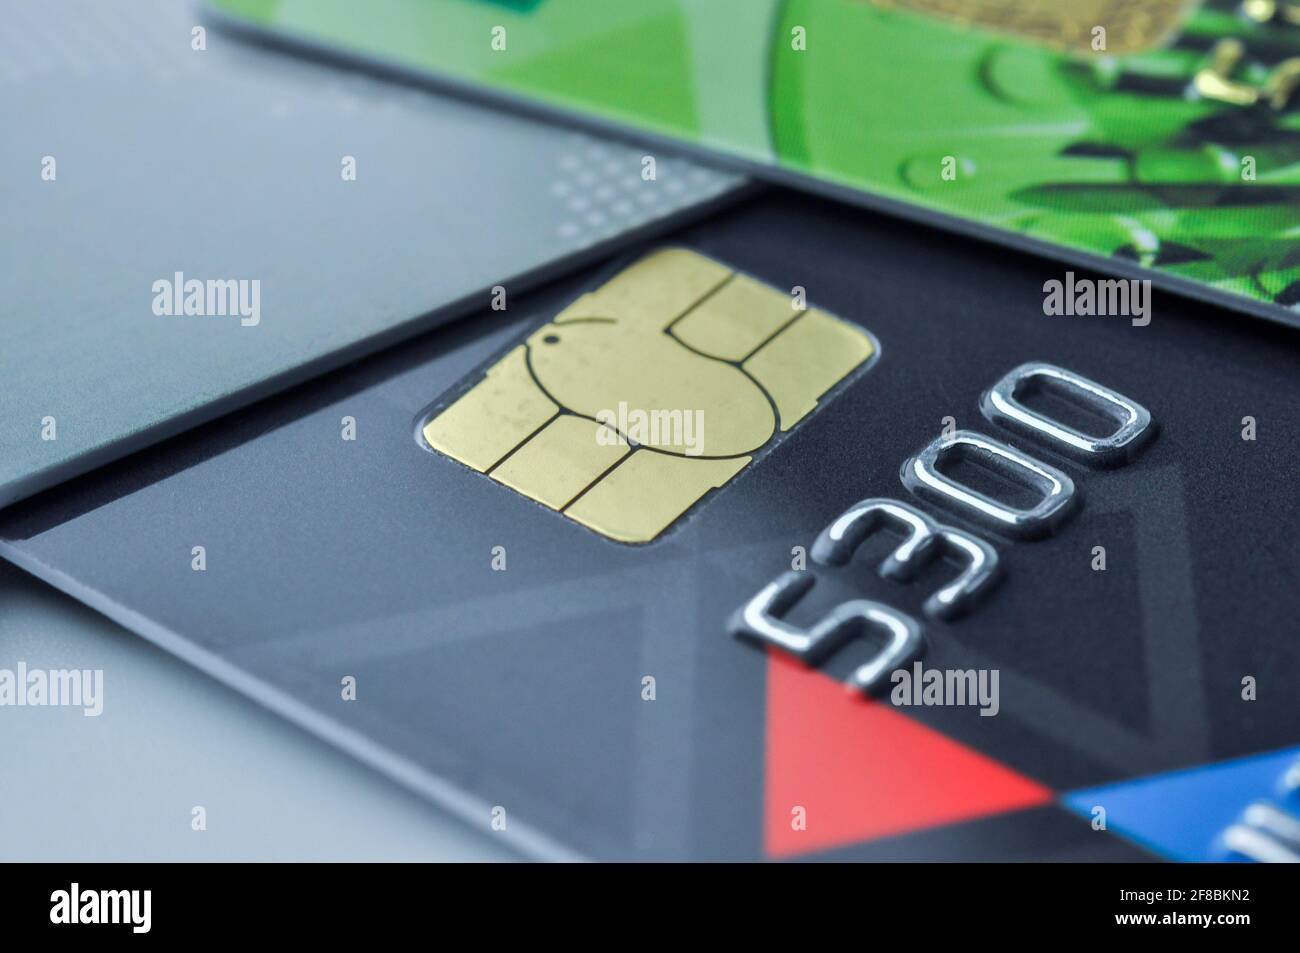 Credit cards and smart chip with shallow depth of field. Macro shot. E-commerce and cashless payment concept. Stock Photo